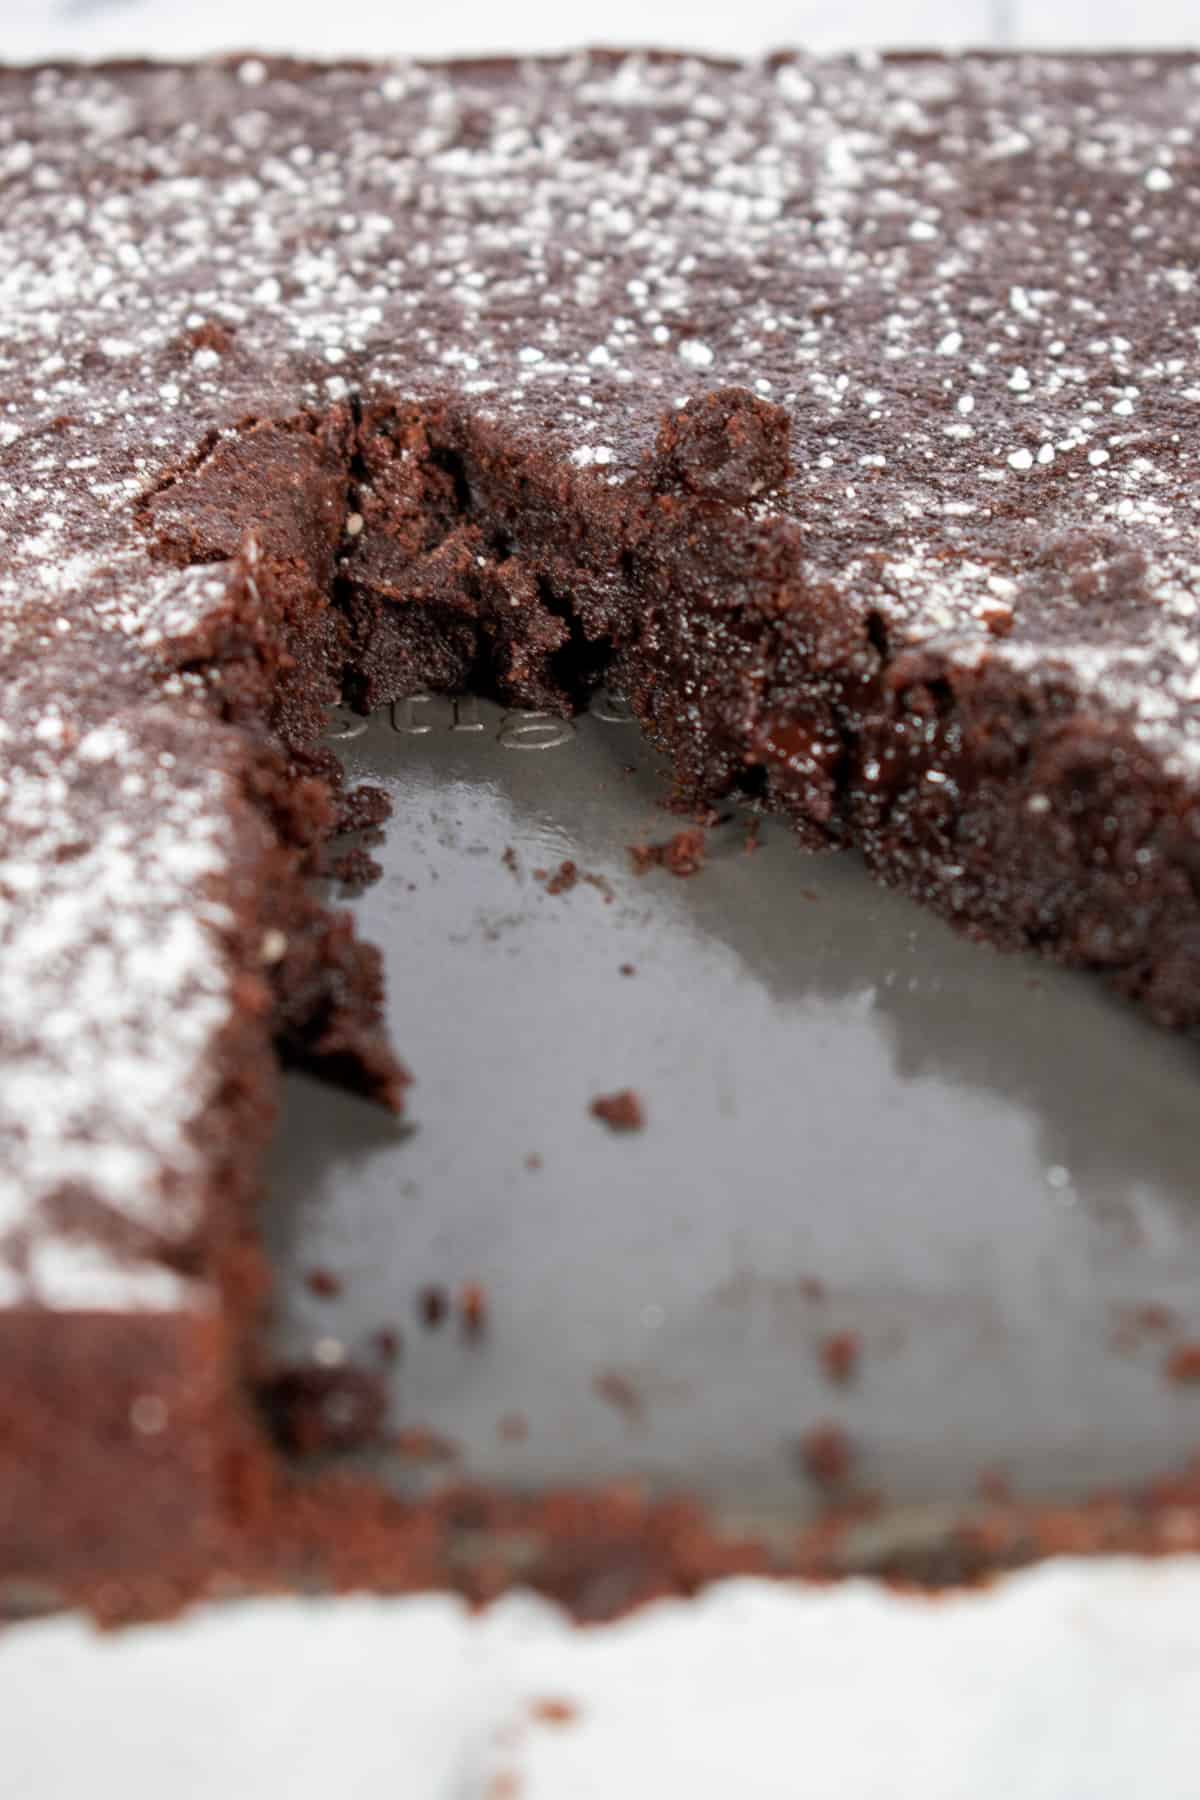 A vegan chocolate fudge cake with a slice missing.